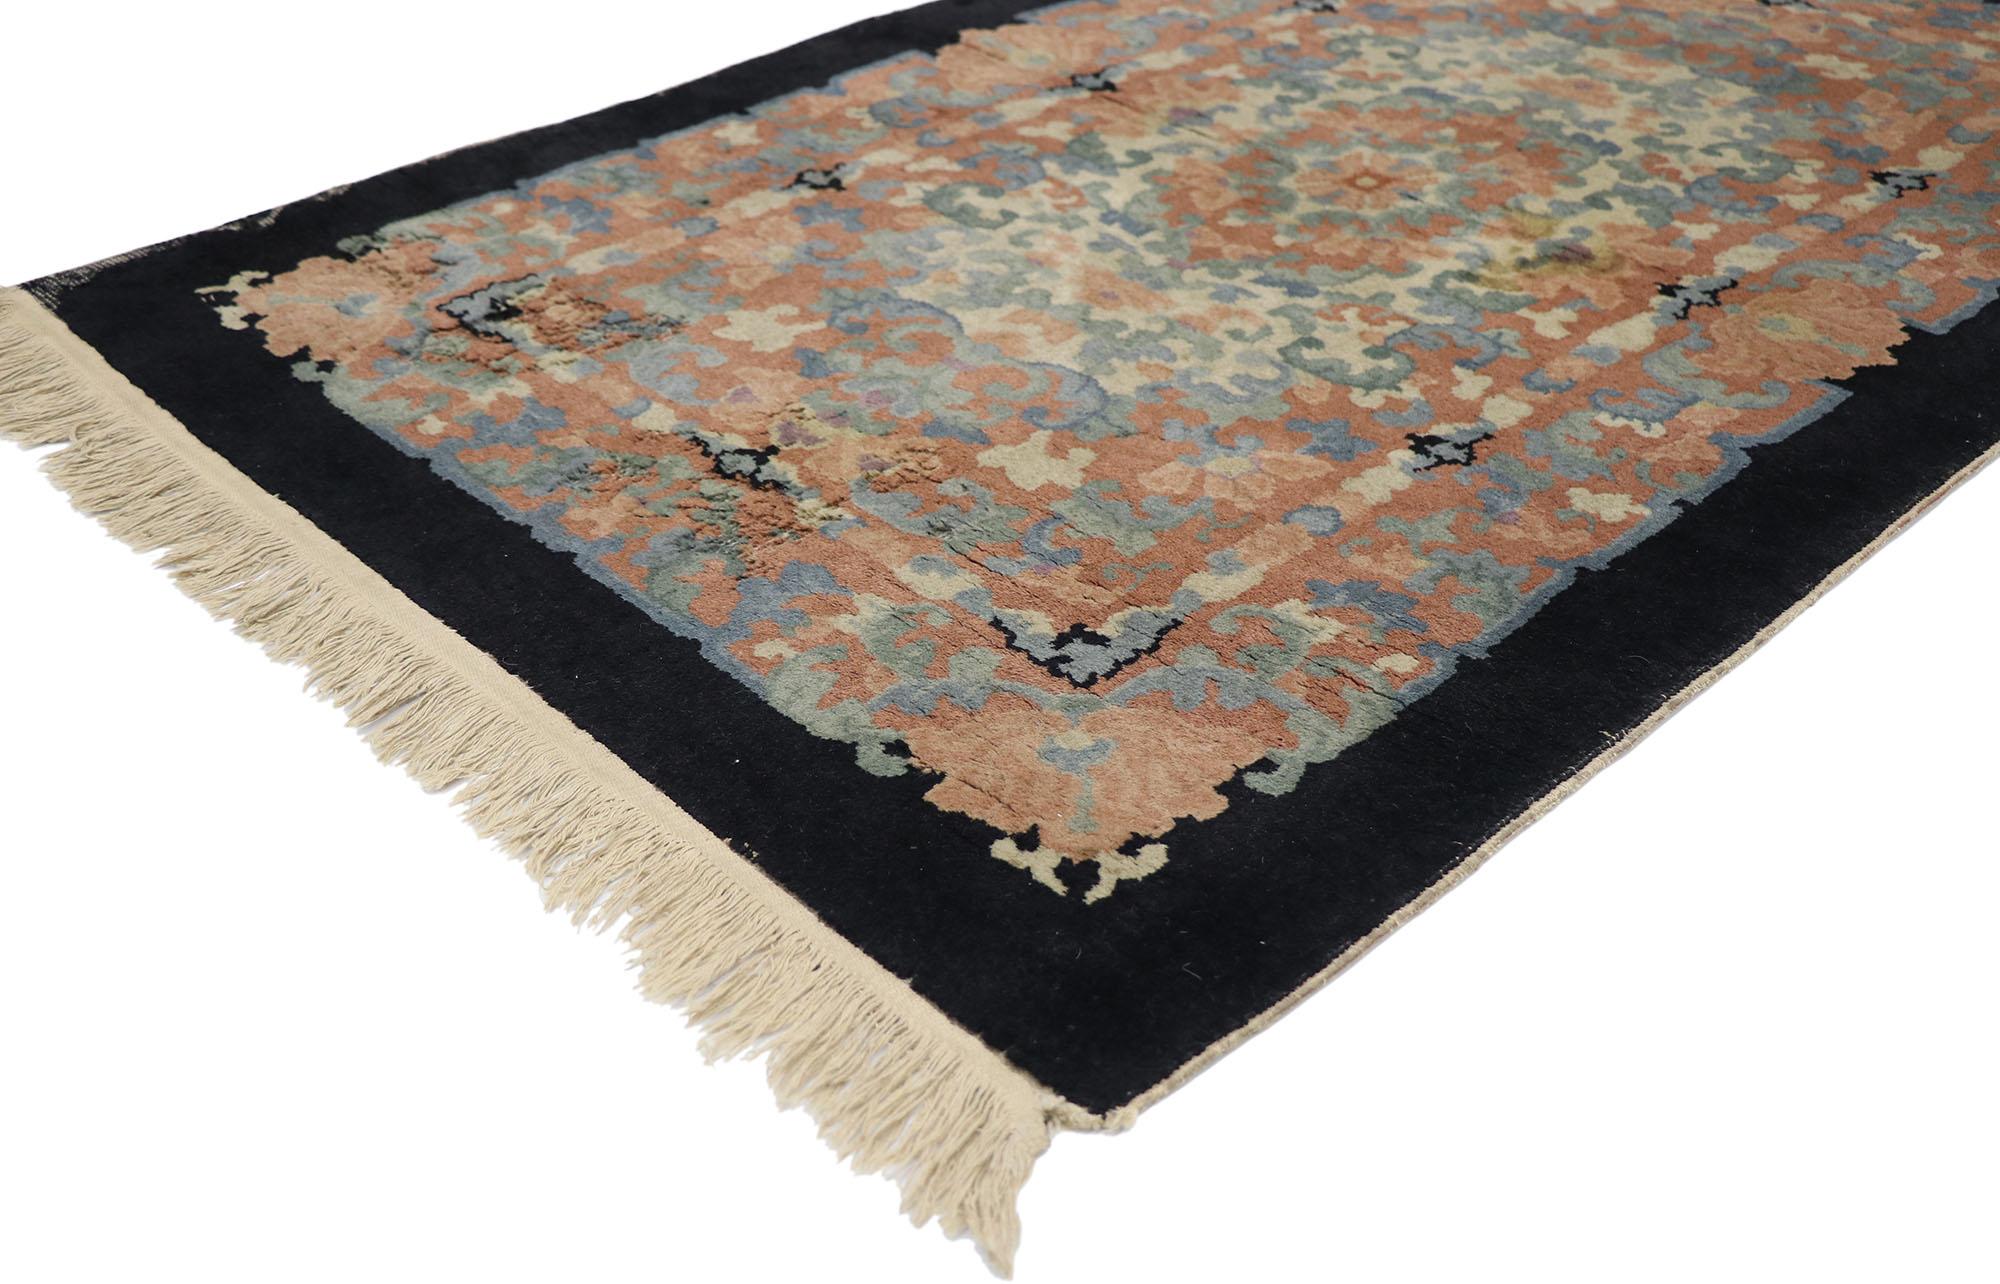 77782 Antique Chinese Art Deco Rug with European Influenced Chinoiserie Style 03'02 x 05'00. This hand knotted wool antique Chinese Art Deco rug features a subtle all-over arabesque pattern spread across a beige field enclosed by an ornate floral